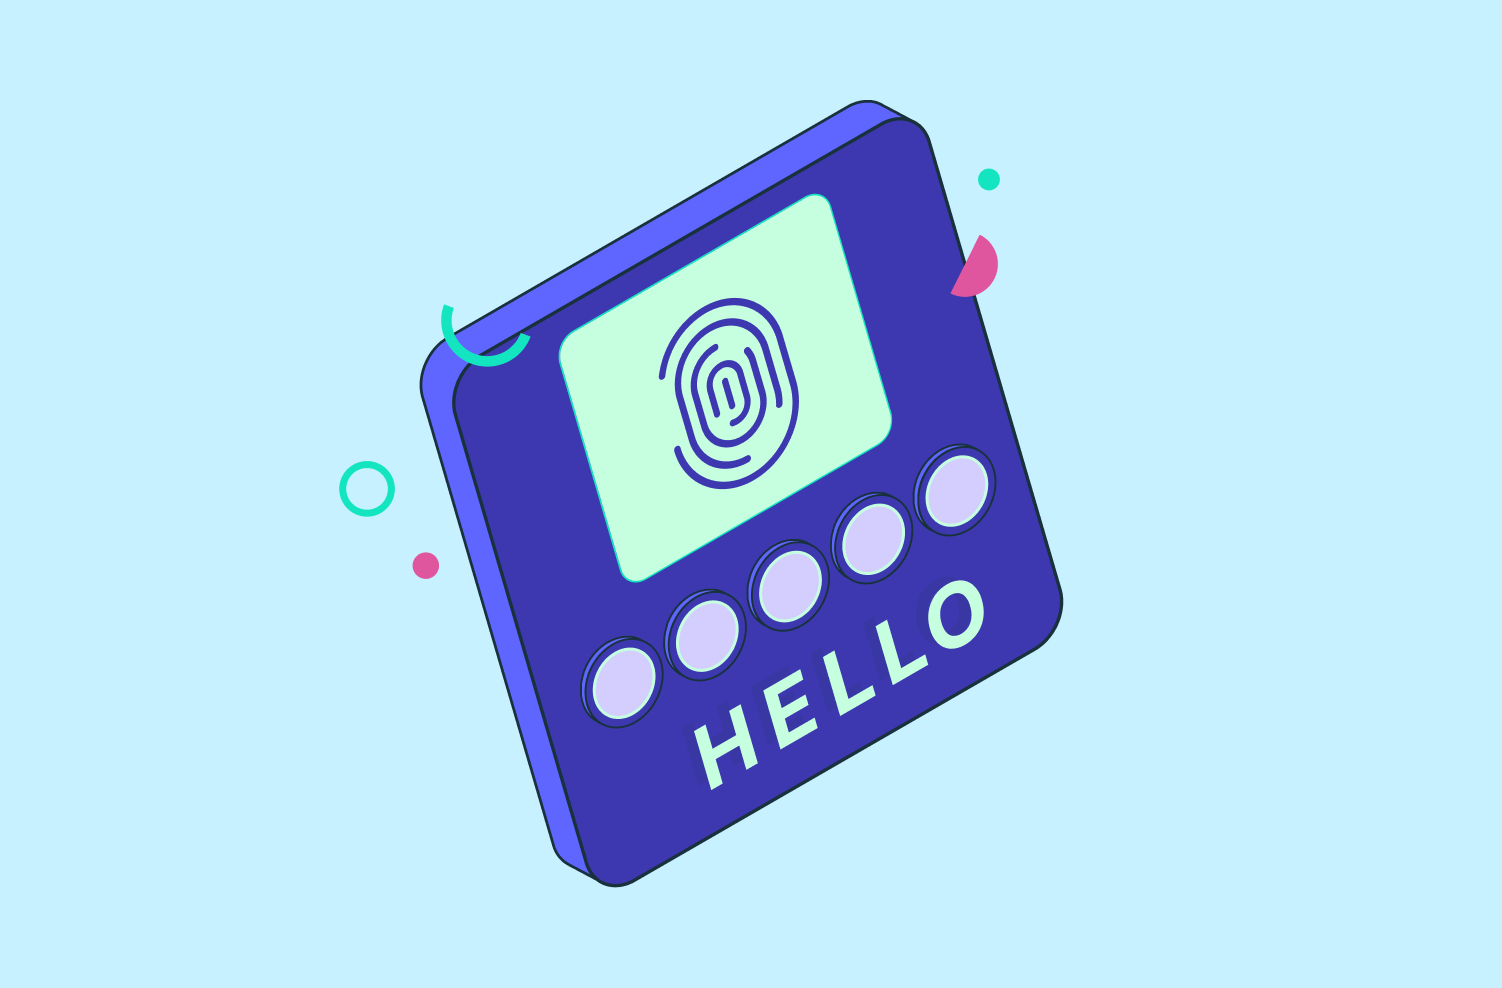 A thumbprint on a welcome screen, symbolizing biometric authentication